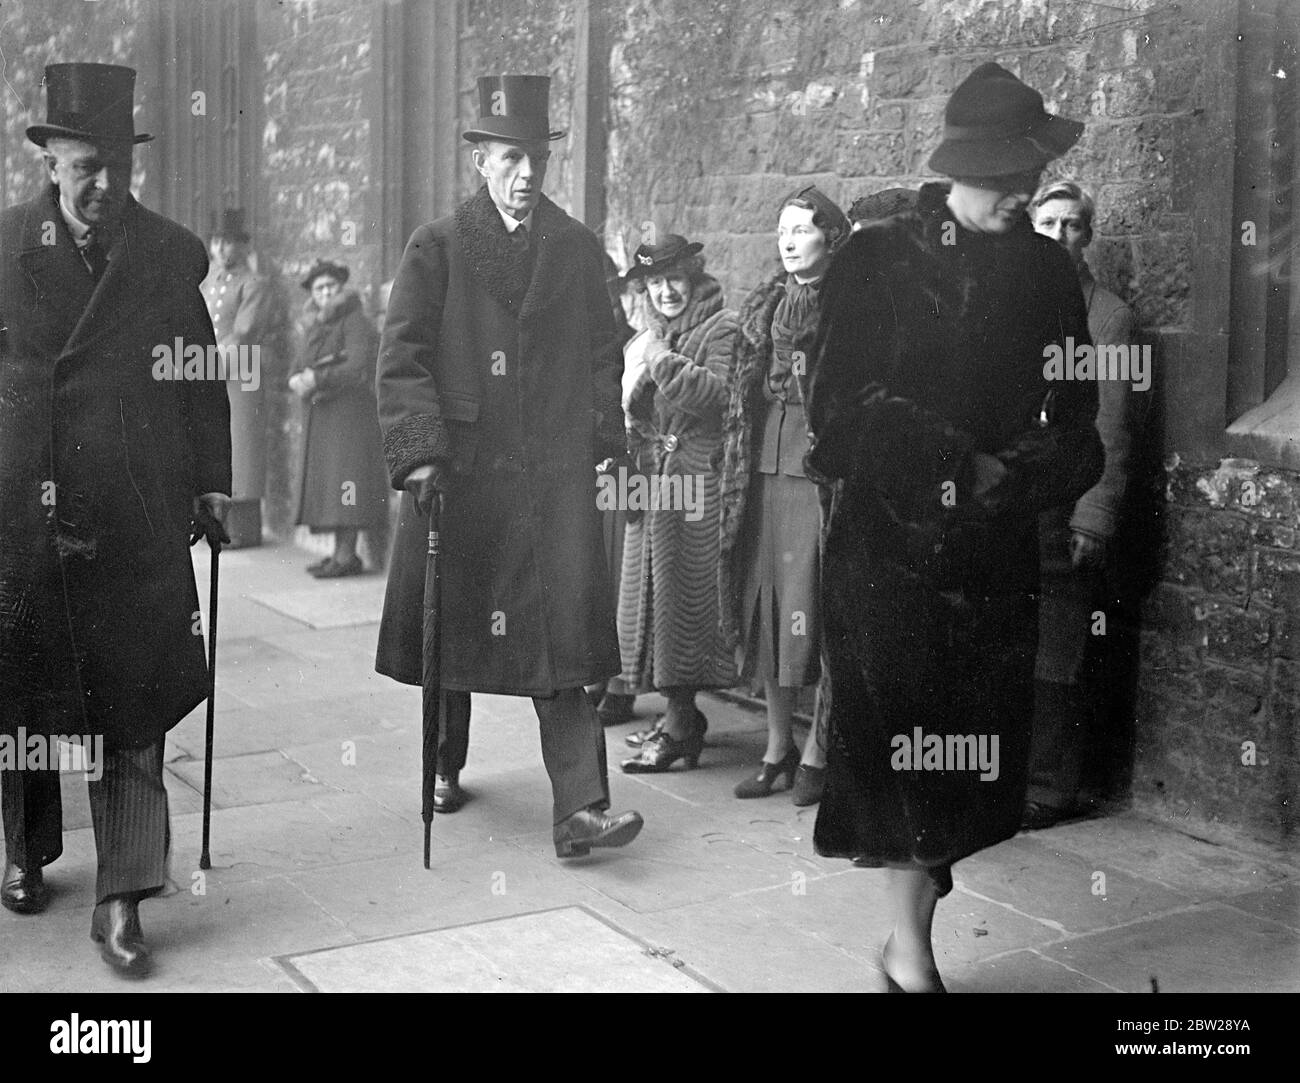 Lord Halifax at Abbey service for Mr MacDonald. Statesman formed a considerable part of the congregation when the funeral service for for Mr Ramsay MacDonald took place in Westminster Abbey. Photo shows, Lord Halifax, Lord President of the Council, arriving for the service. 26 November 1937 Stock Photo